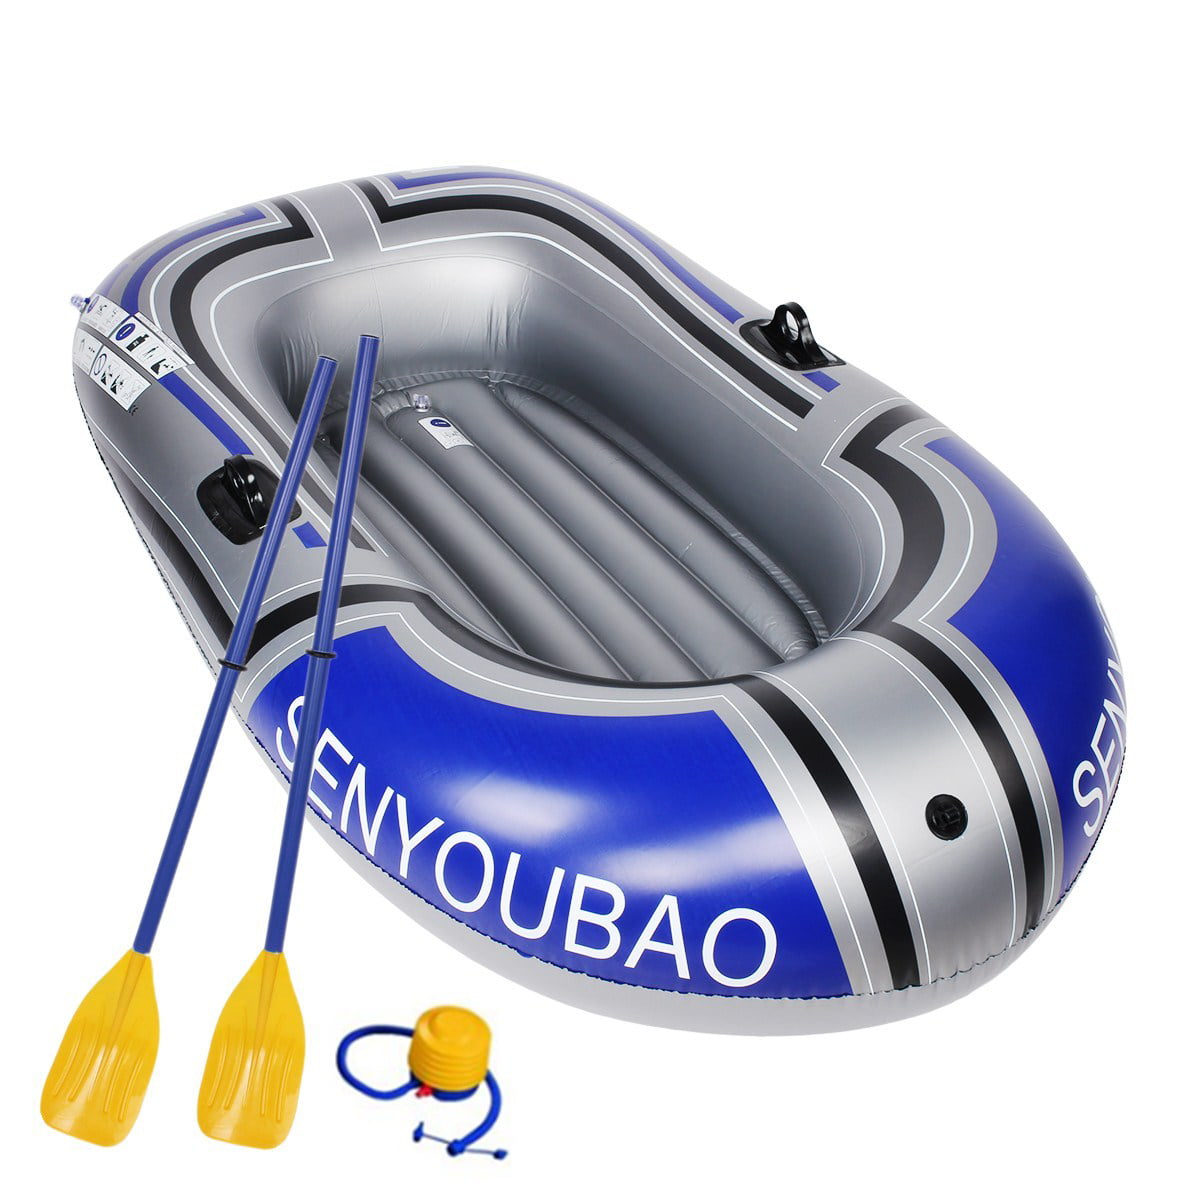 2 Person Inflatable Boat with Oars and Pump, Lebanon